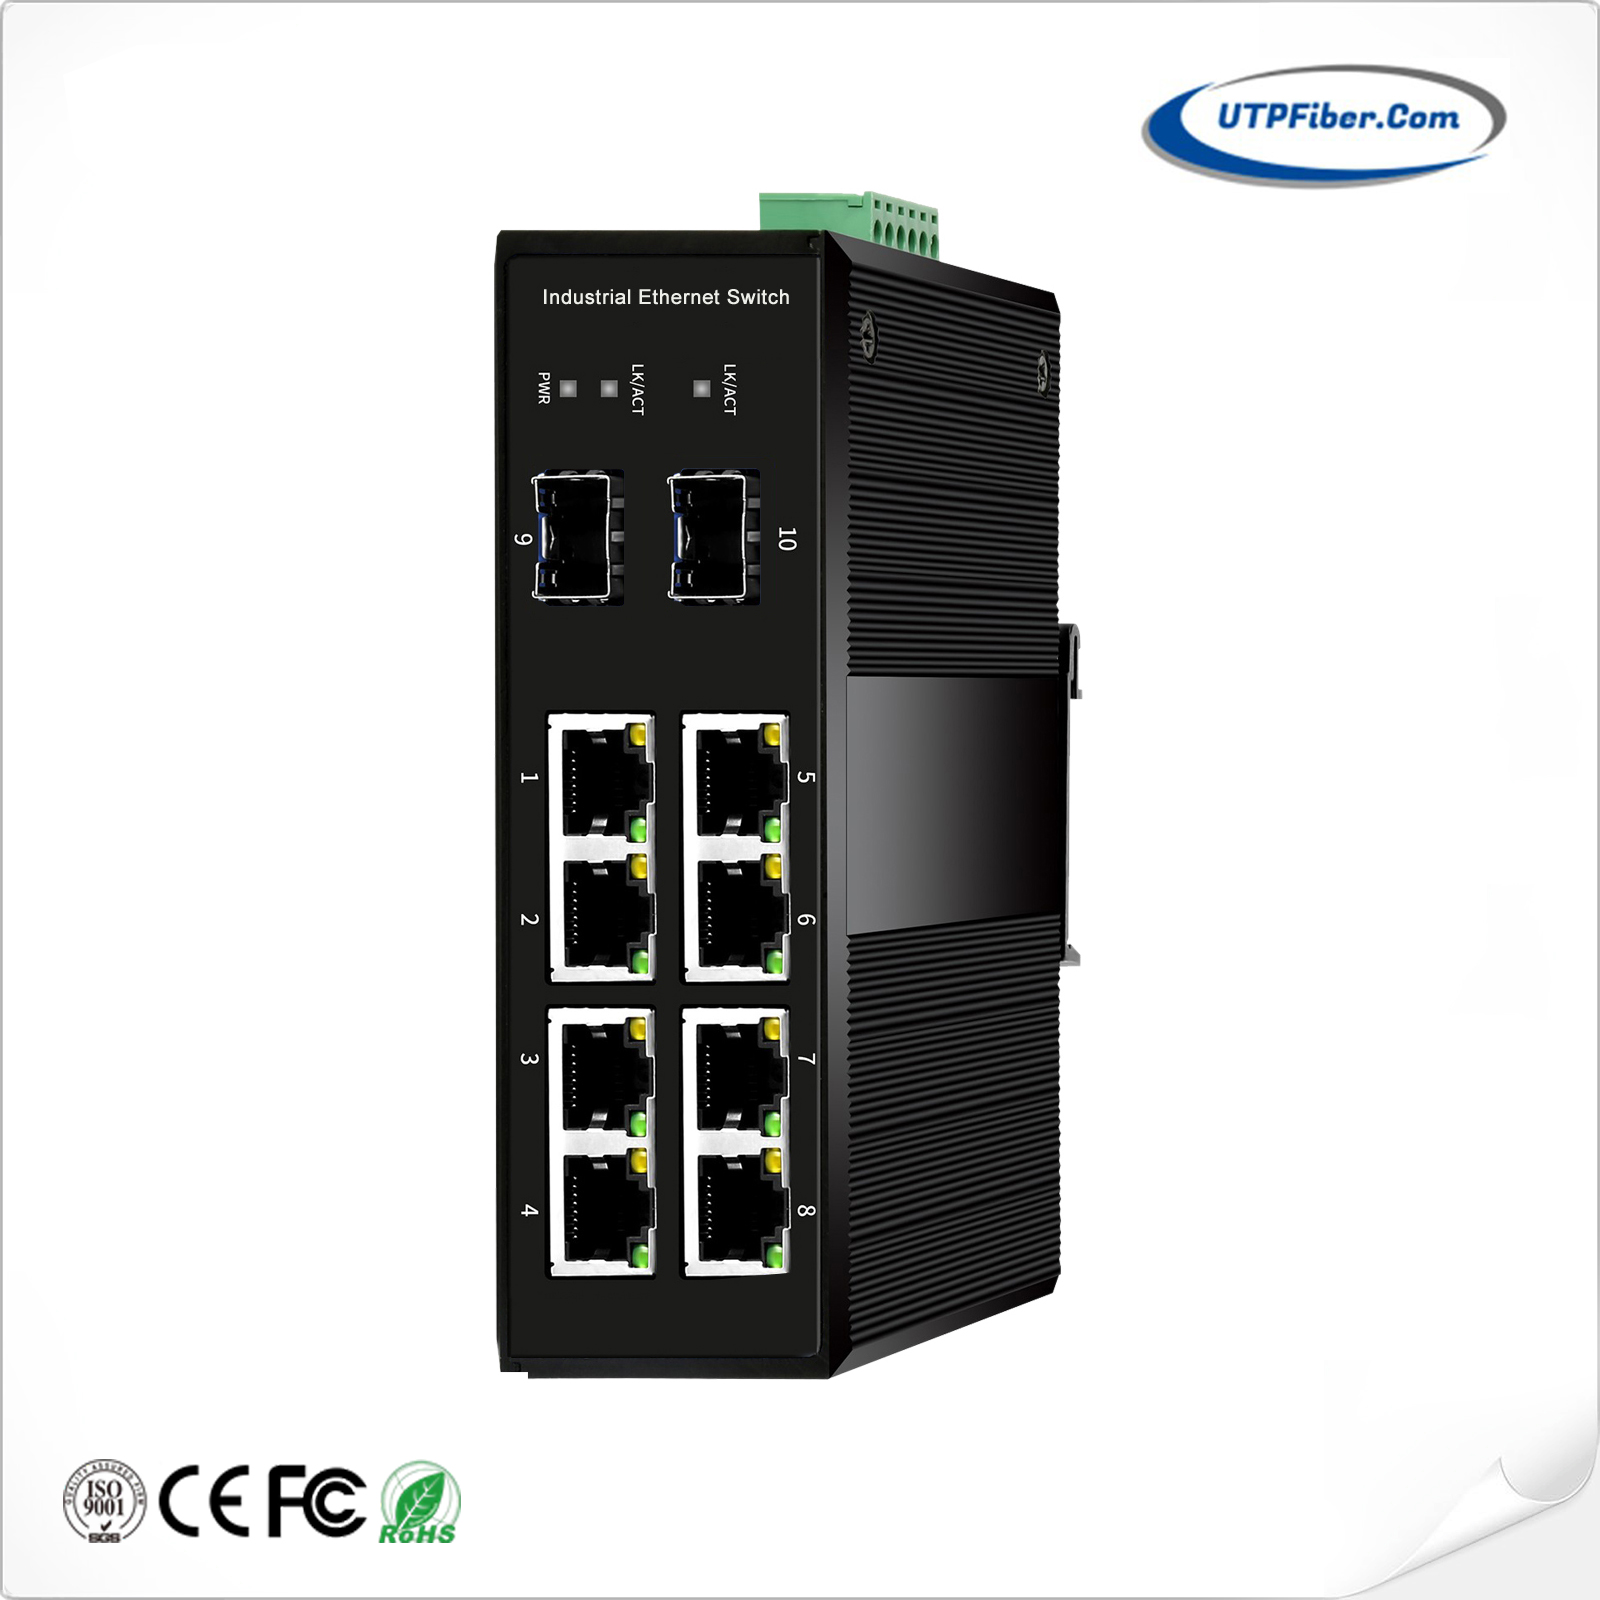 L2+ Industrial 8-Port 10/100/1000T 802.3at PoE + 2-Port 100/1000X SFP Managed Ethernet Switch